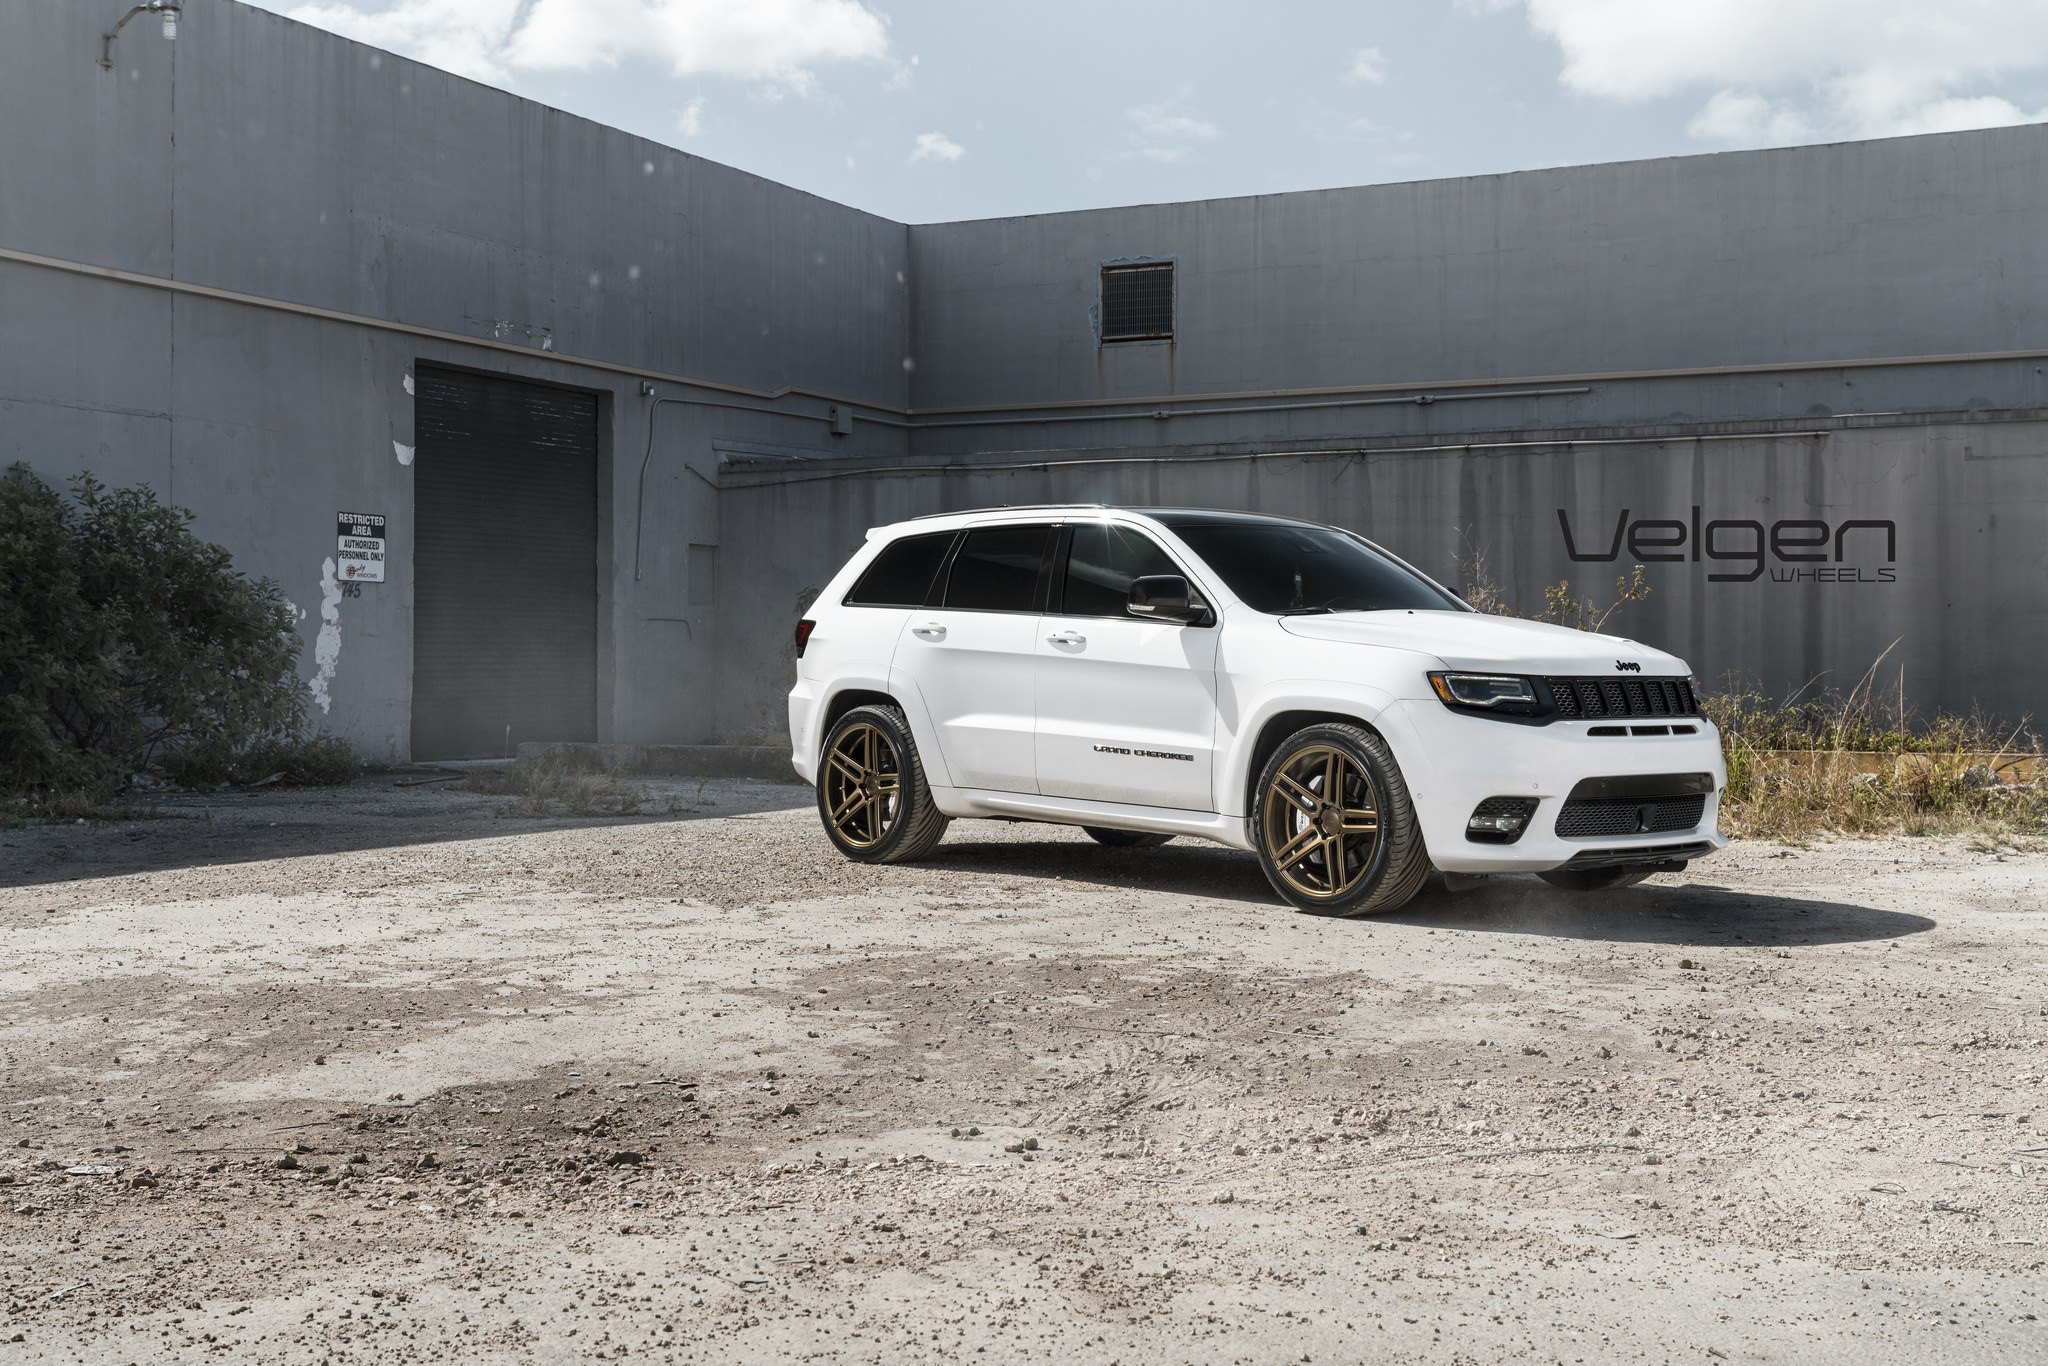 Aftermarket Side Skirts on White Jeep Grand Cherokee - Photo by Velgen Wheels